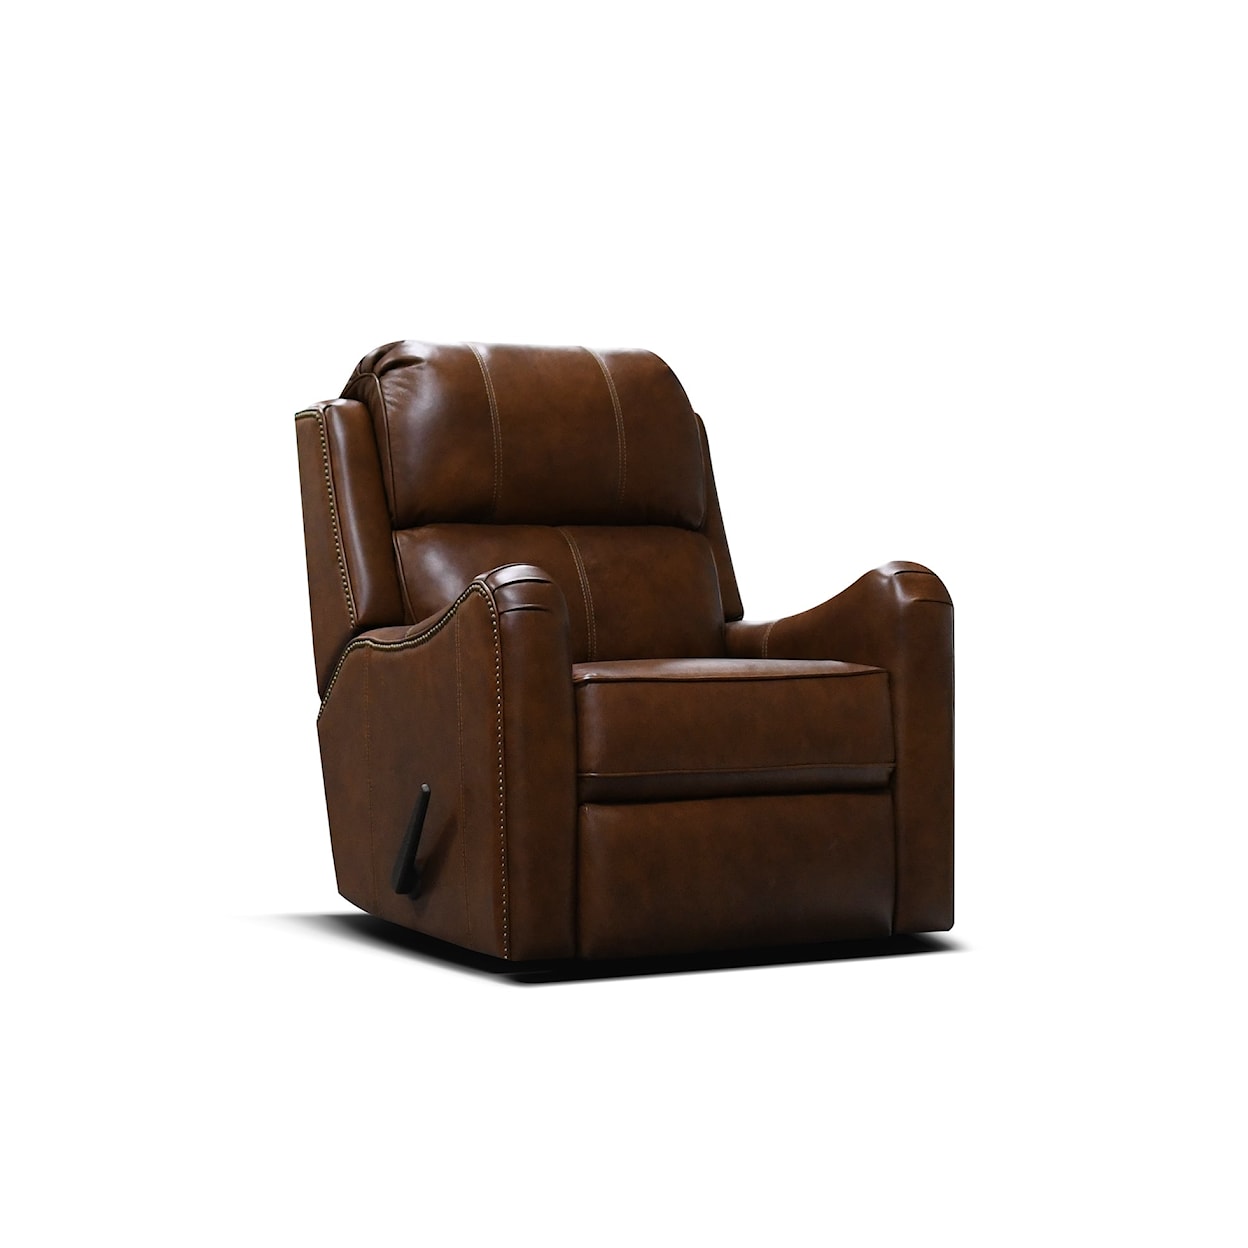 England EZ2G00/AL/N Series Leather Rocker Recliner with Nailheads